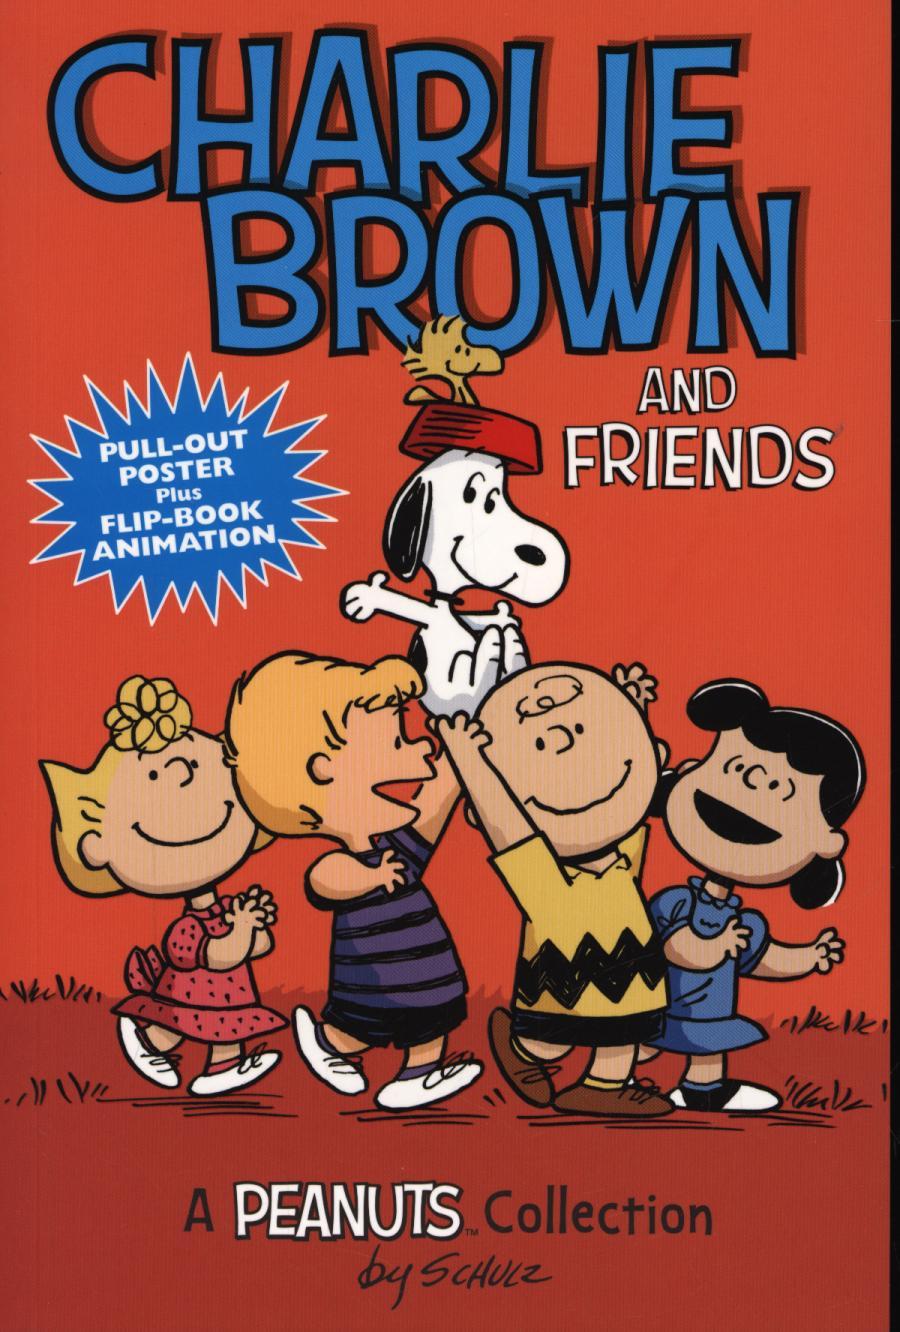 Charlie Brown and Friends  (PEANUTS AMP! Series Book 2)